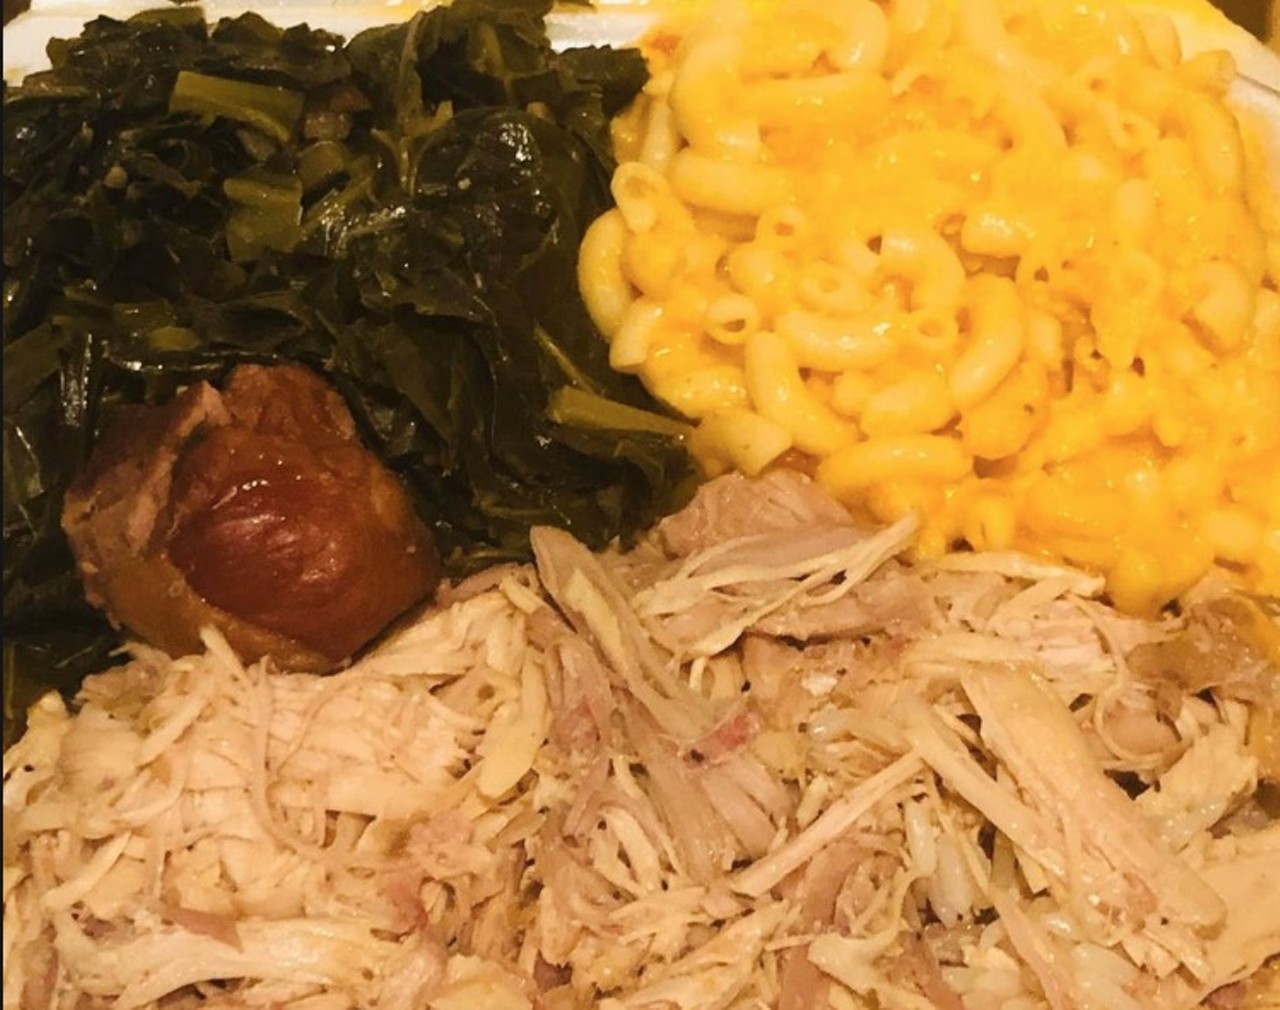 Kim&#146;s Kitchen 
5500 Clarcona Ocoee Road, 407-435-3830
If you&#146;re craving some proper soul food, Kim&#146;s Kitchen will treat you like (hungry) royalty. You'll find it all here, tucked inside a Citgo: smothered pork chops, collard greens, yams, fried chicken and turkey wings.   
Photo via Turkey, mac & cheese and collard greens/Facebook